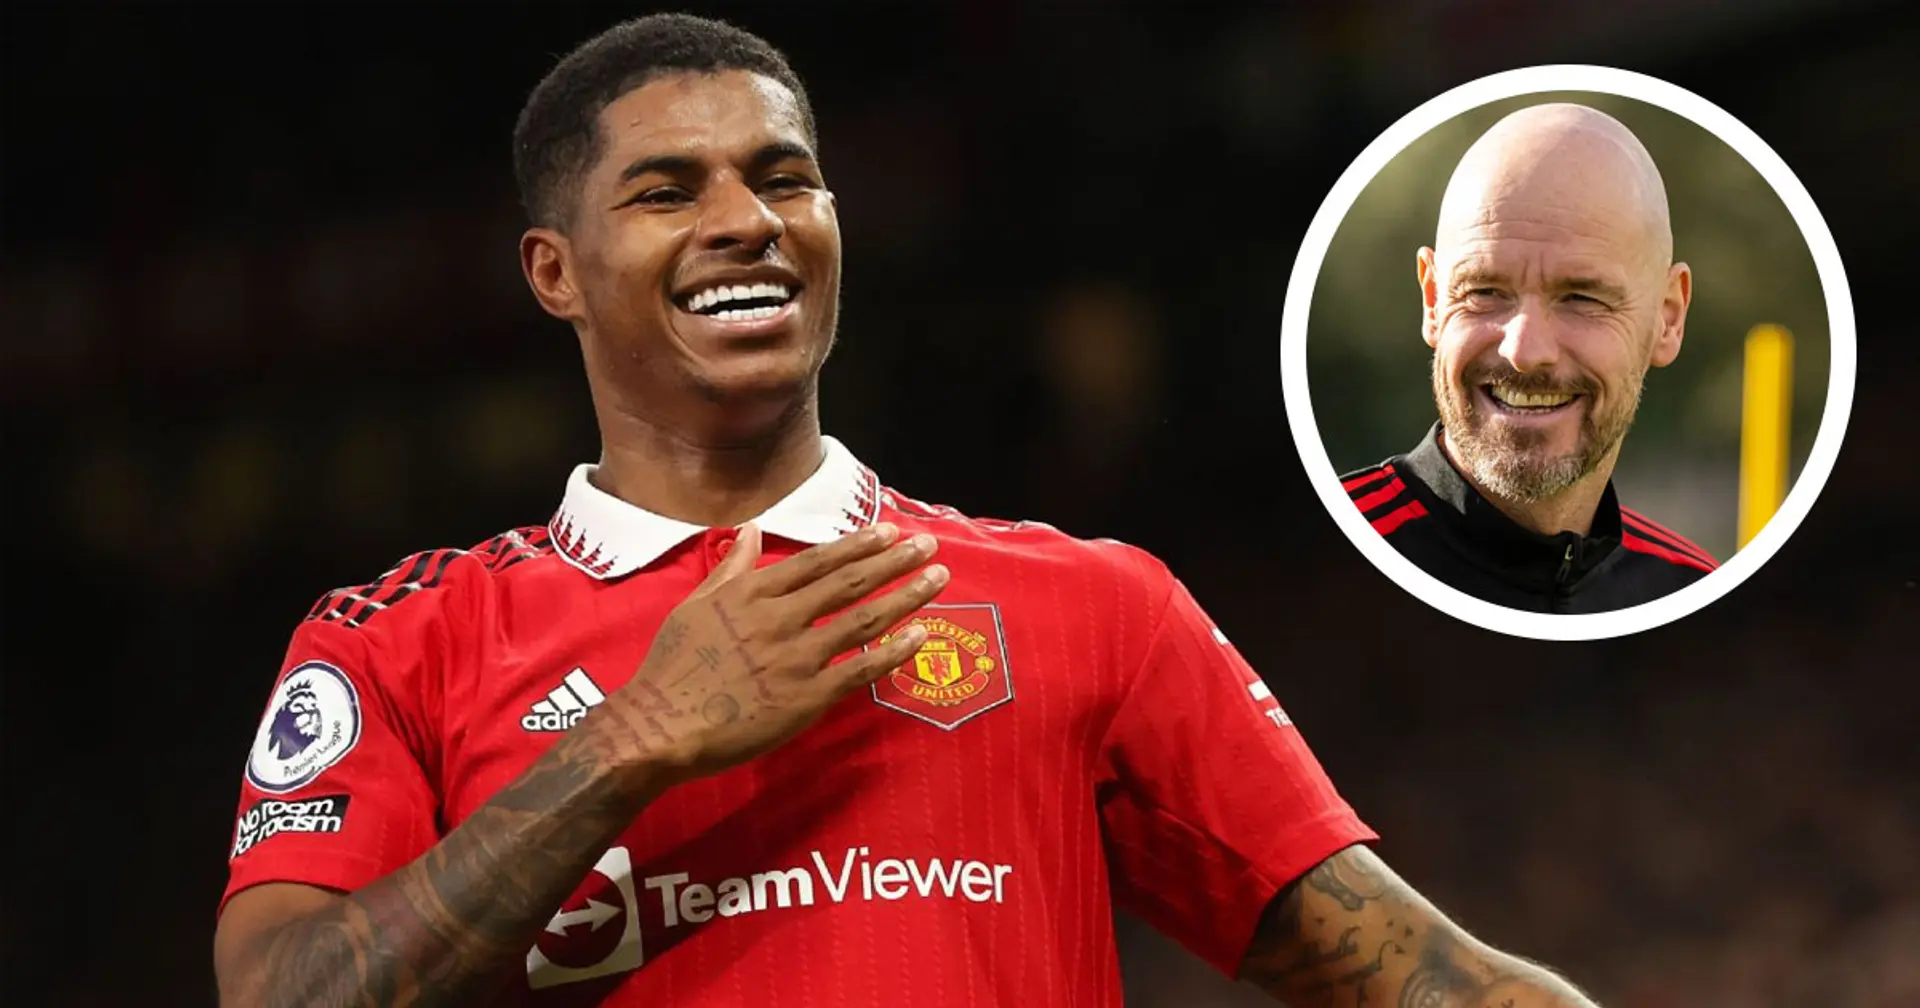 David Ornstein gives key update on Rashford's contract talks with United